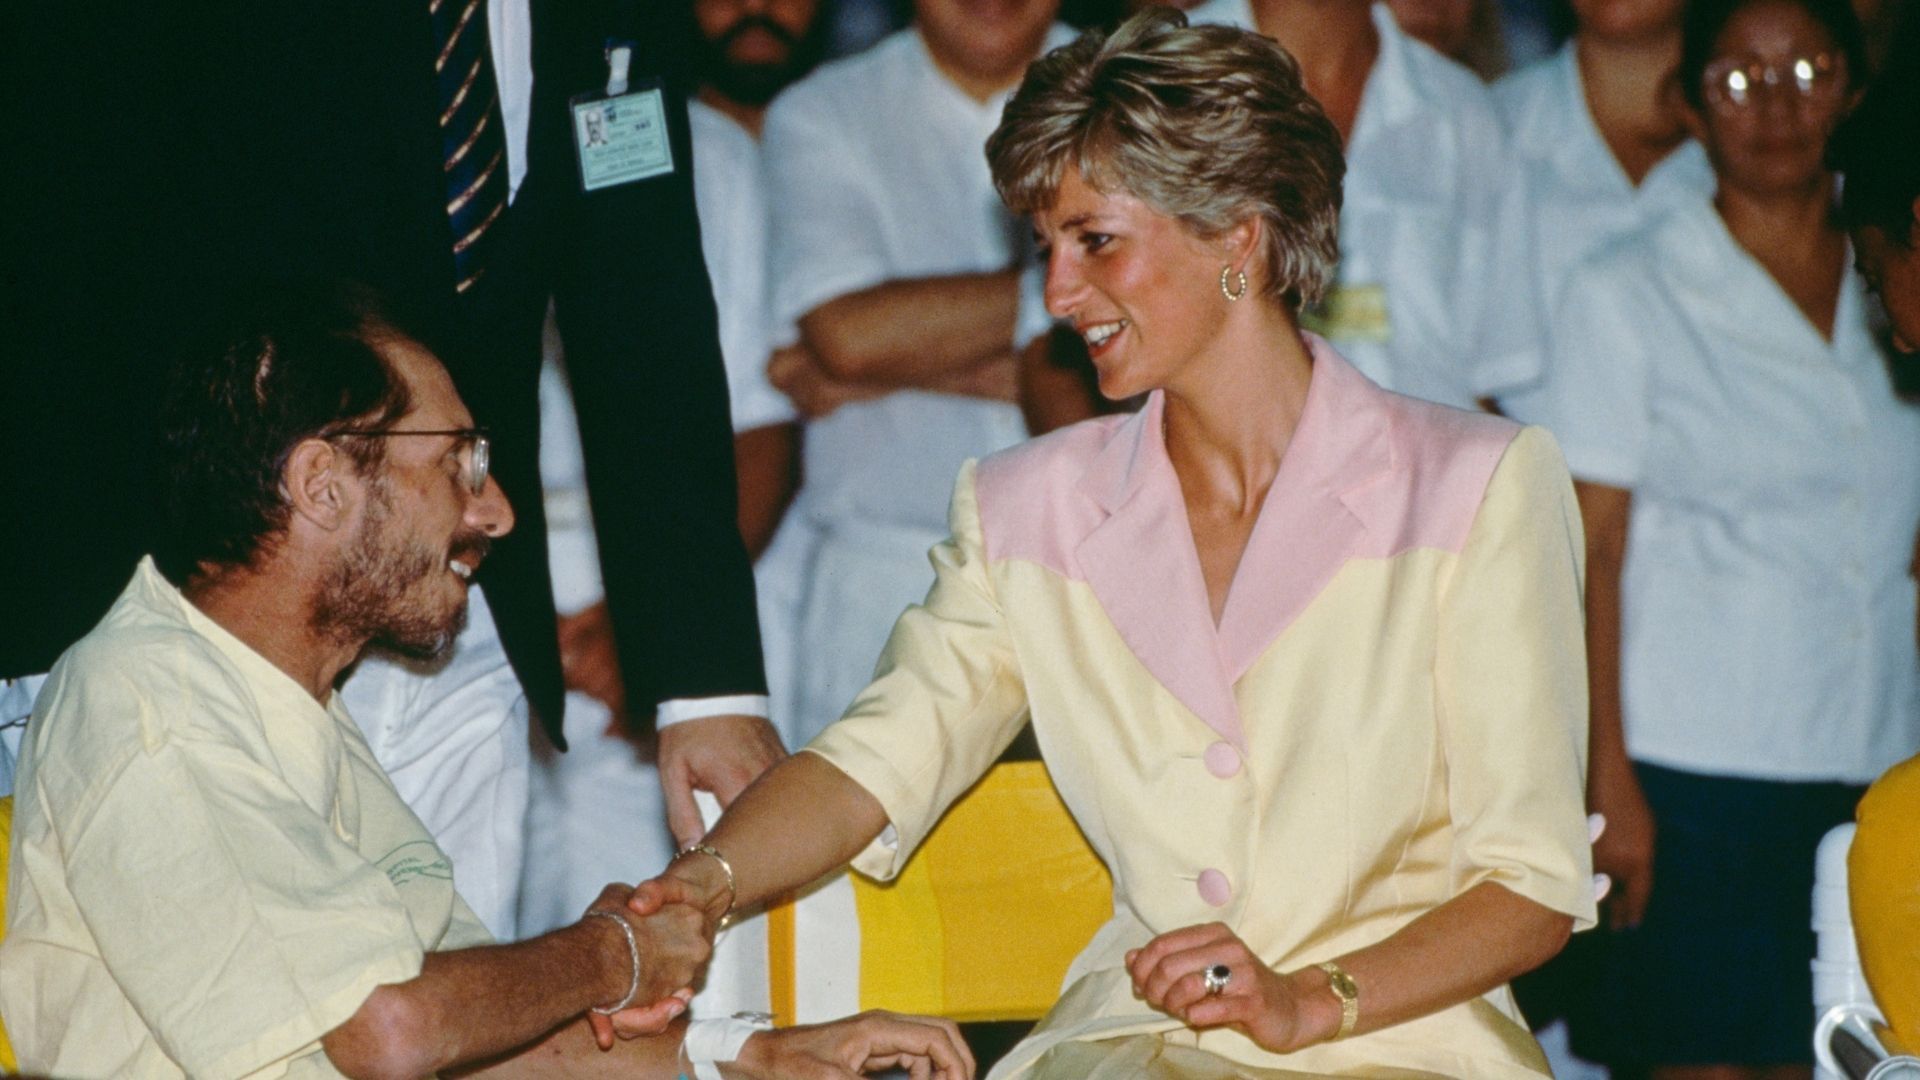 <p>                     In April 1987, Princess Diana opened the first purpose-built HIV/Aids unit in the UK. It was an important step at a time when so many patients with the illness were being treated with stigma and prejudice rather than with the help and compassion they needed. At the opening, she shook hands with an Aids patient - a radical move, when there was so much stigma around the disease and fears it could be transmitted through touch. She shook 12 men's hands without gloves, publicly challenging the widely-held misconception while demonstrating her support and compassion for the community.                   </p>